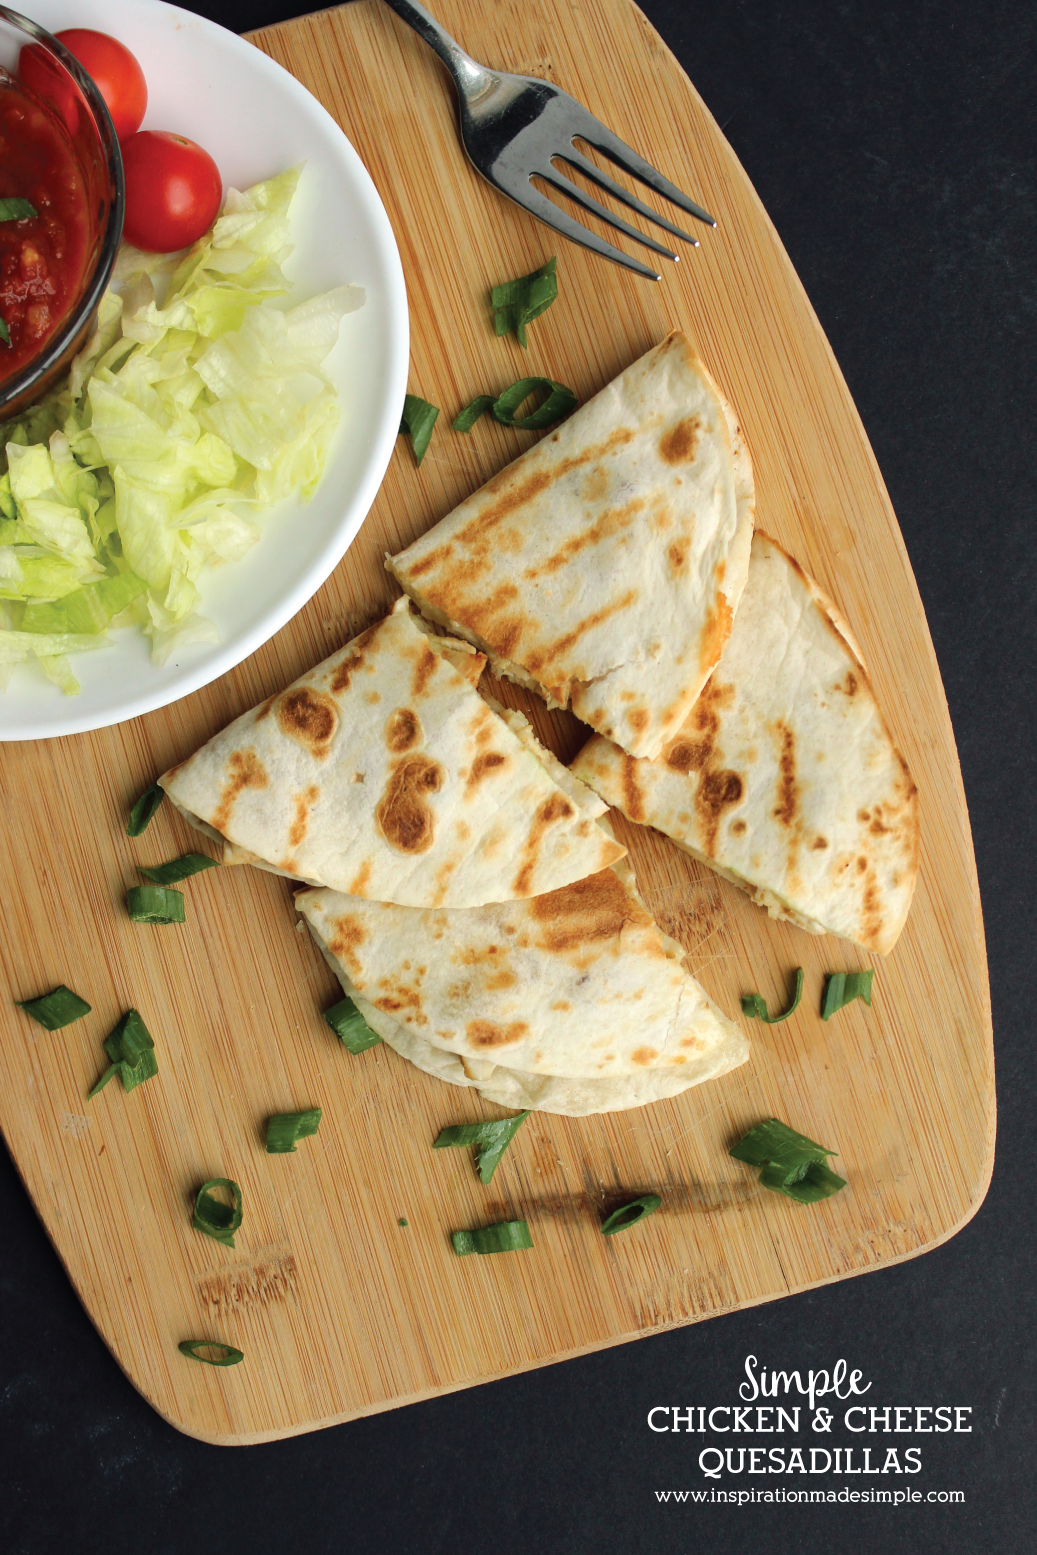 Delicious and simple Chicken and Cheese Quesadilla Recipe - Great appetizer for game day, or combined with other dishes for a family meal!